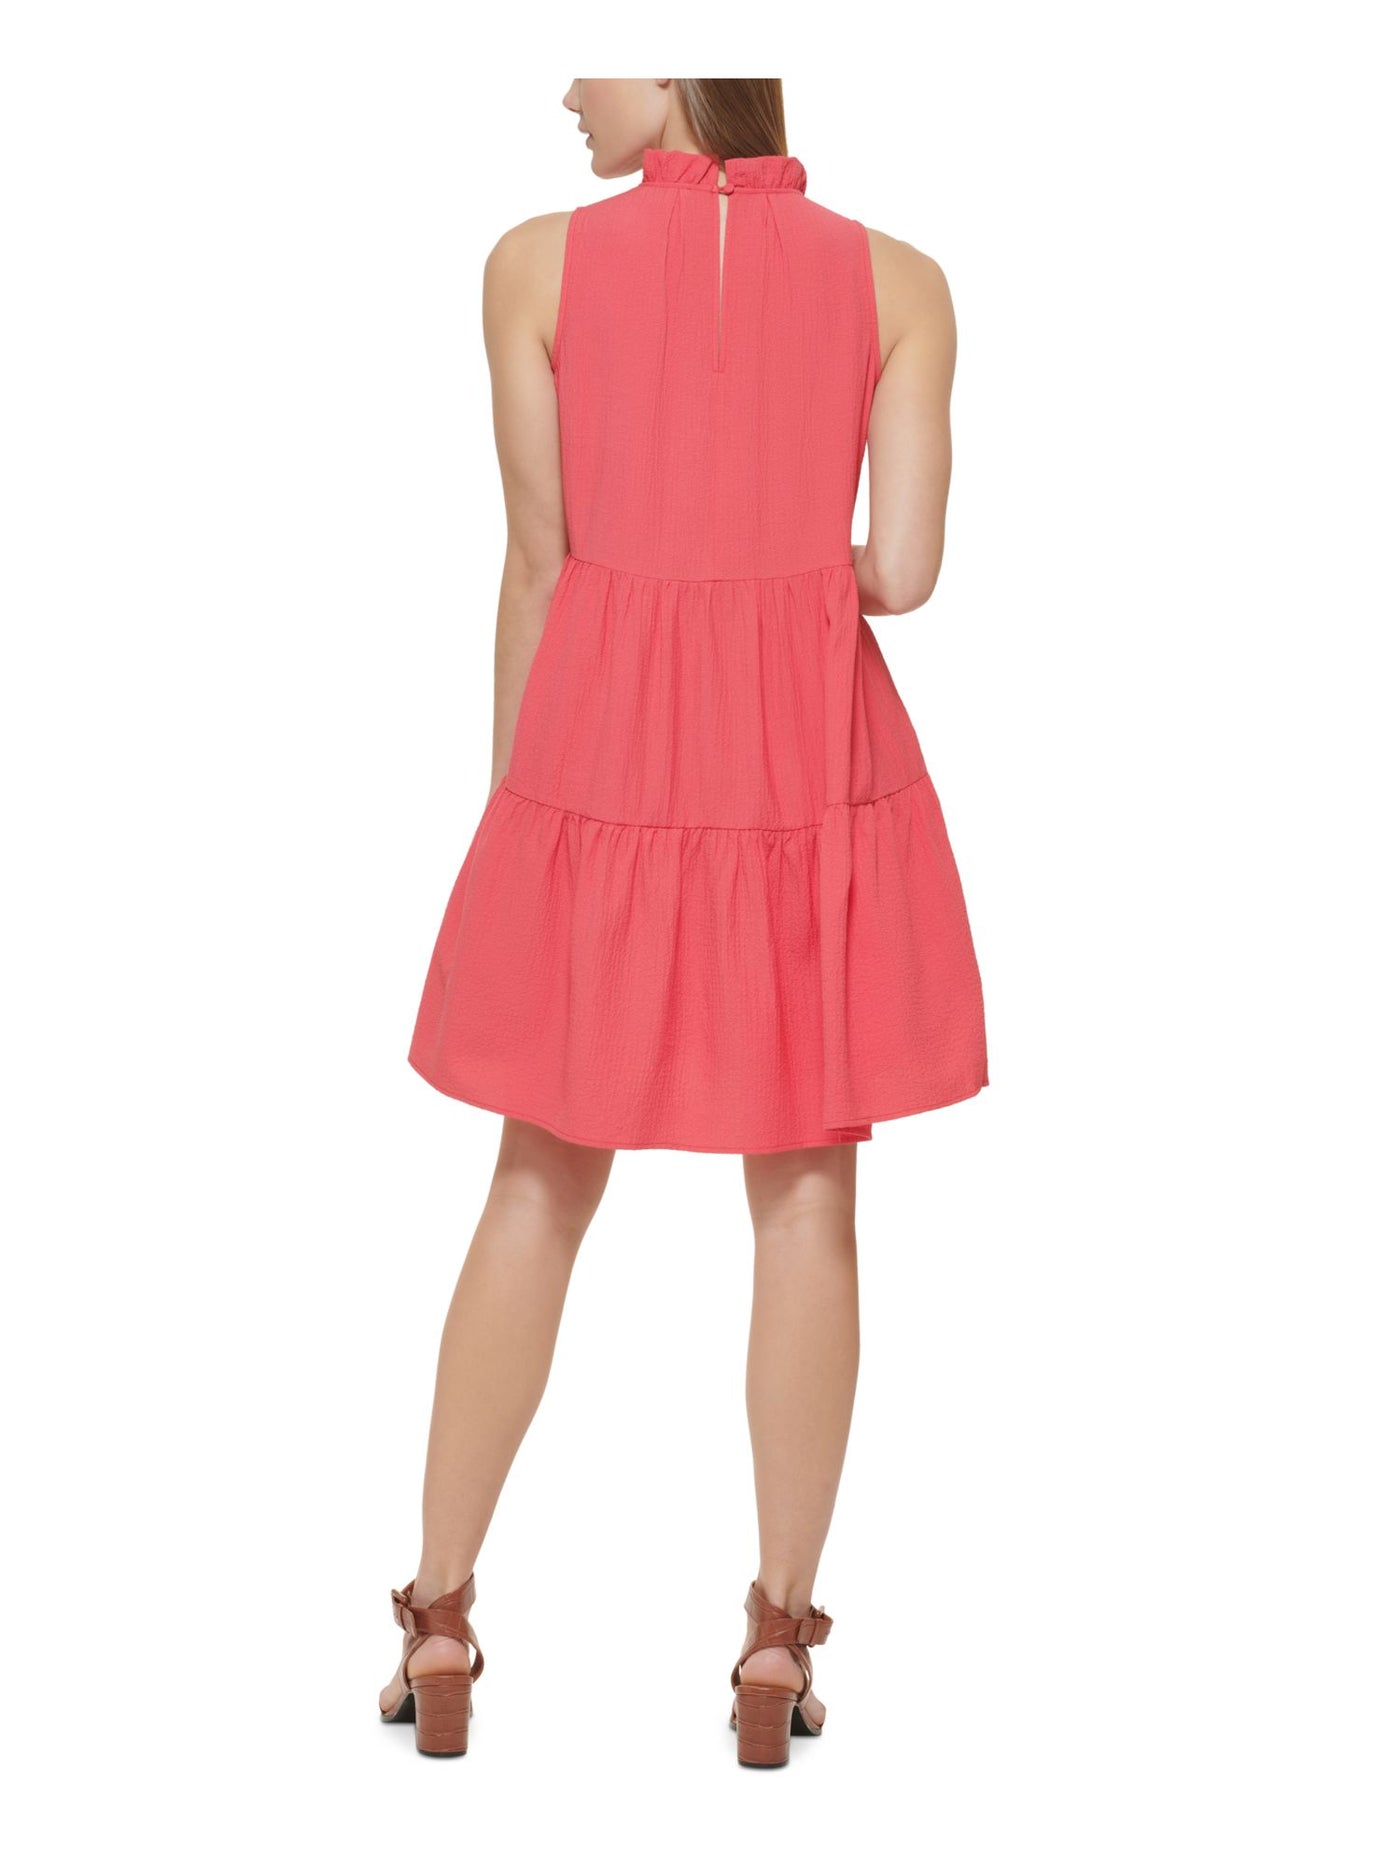 CALVIN KLEIN Womens Pink Pocketed Ruffled Back Button Keyhole Tiered Sleeveless Mock Neck Above The Knee A-Line Dress 10